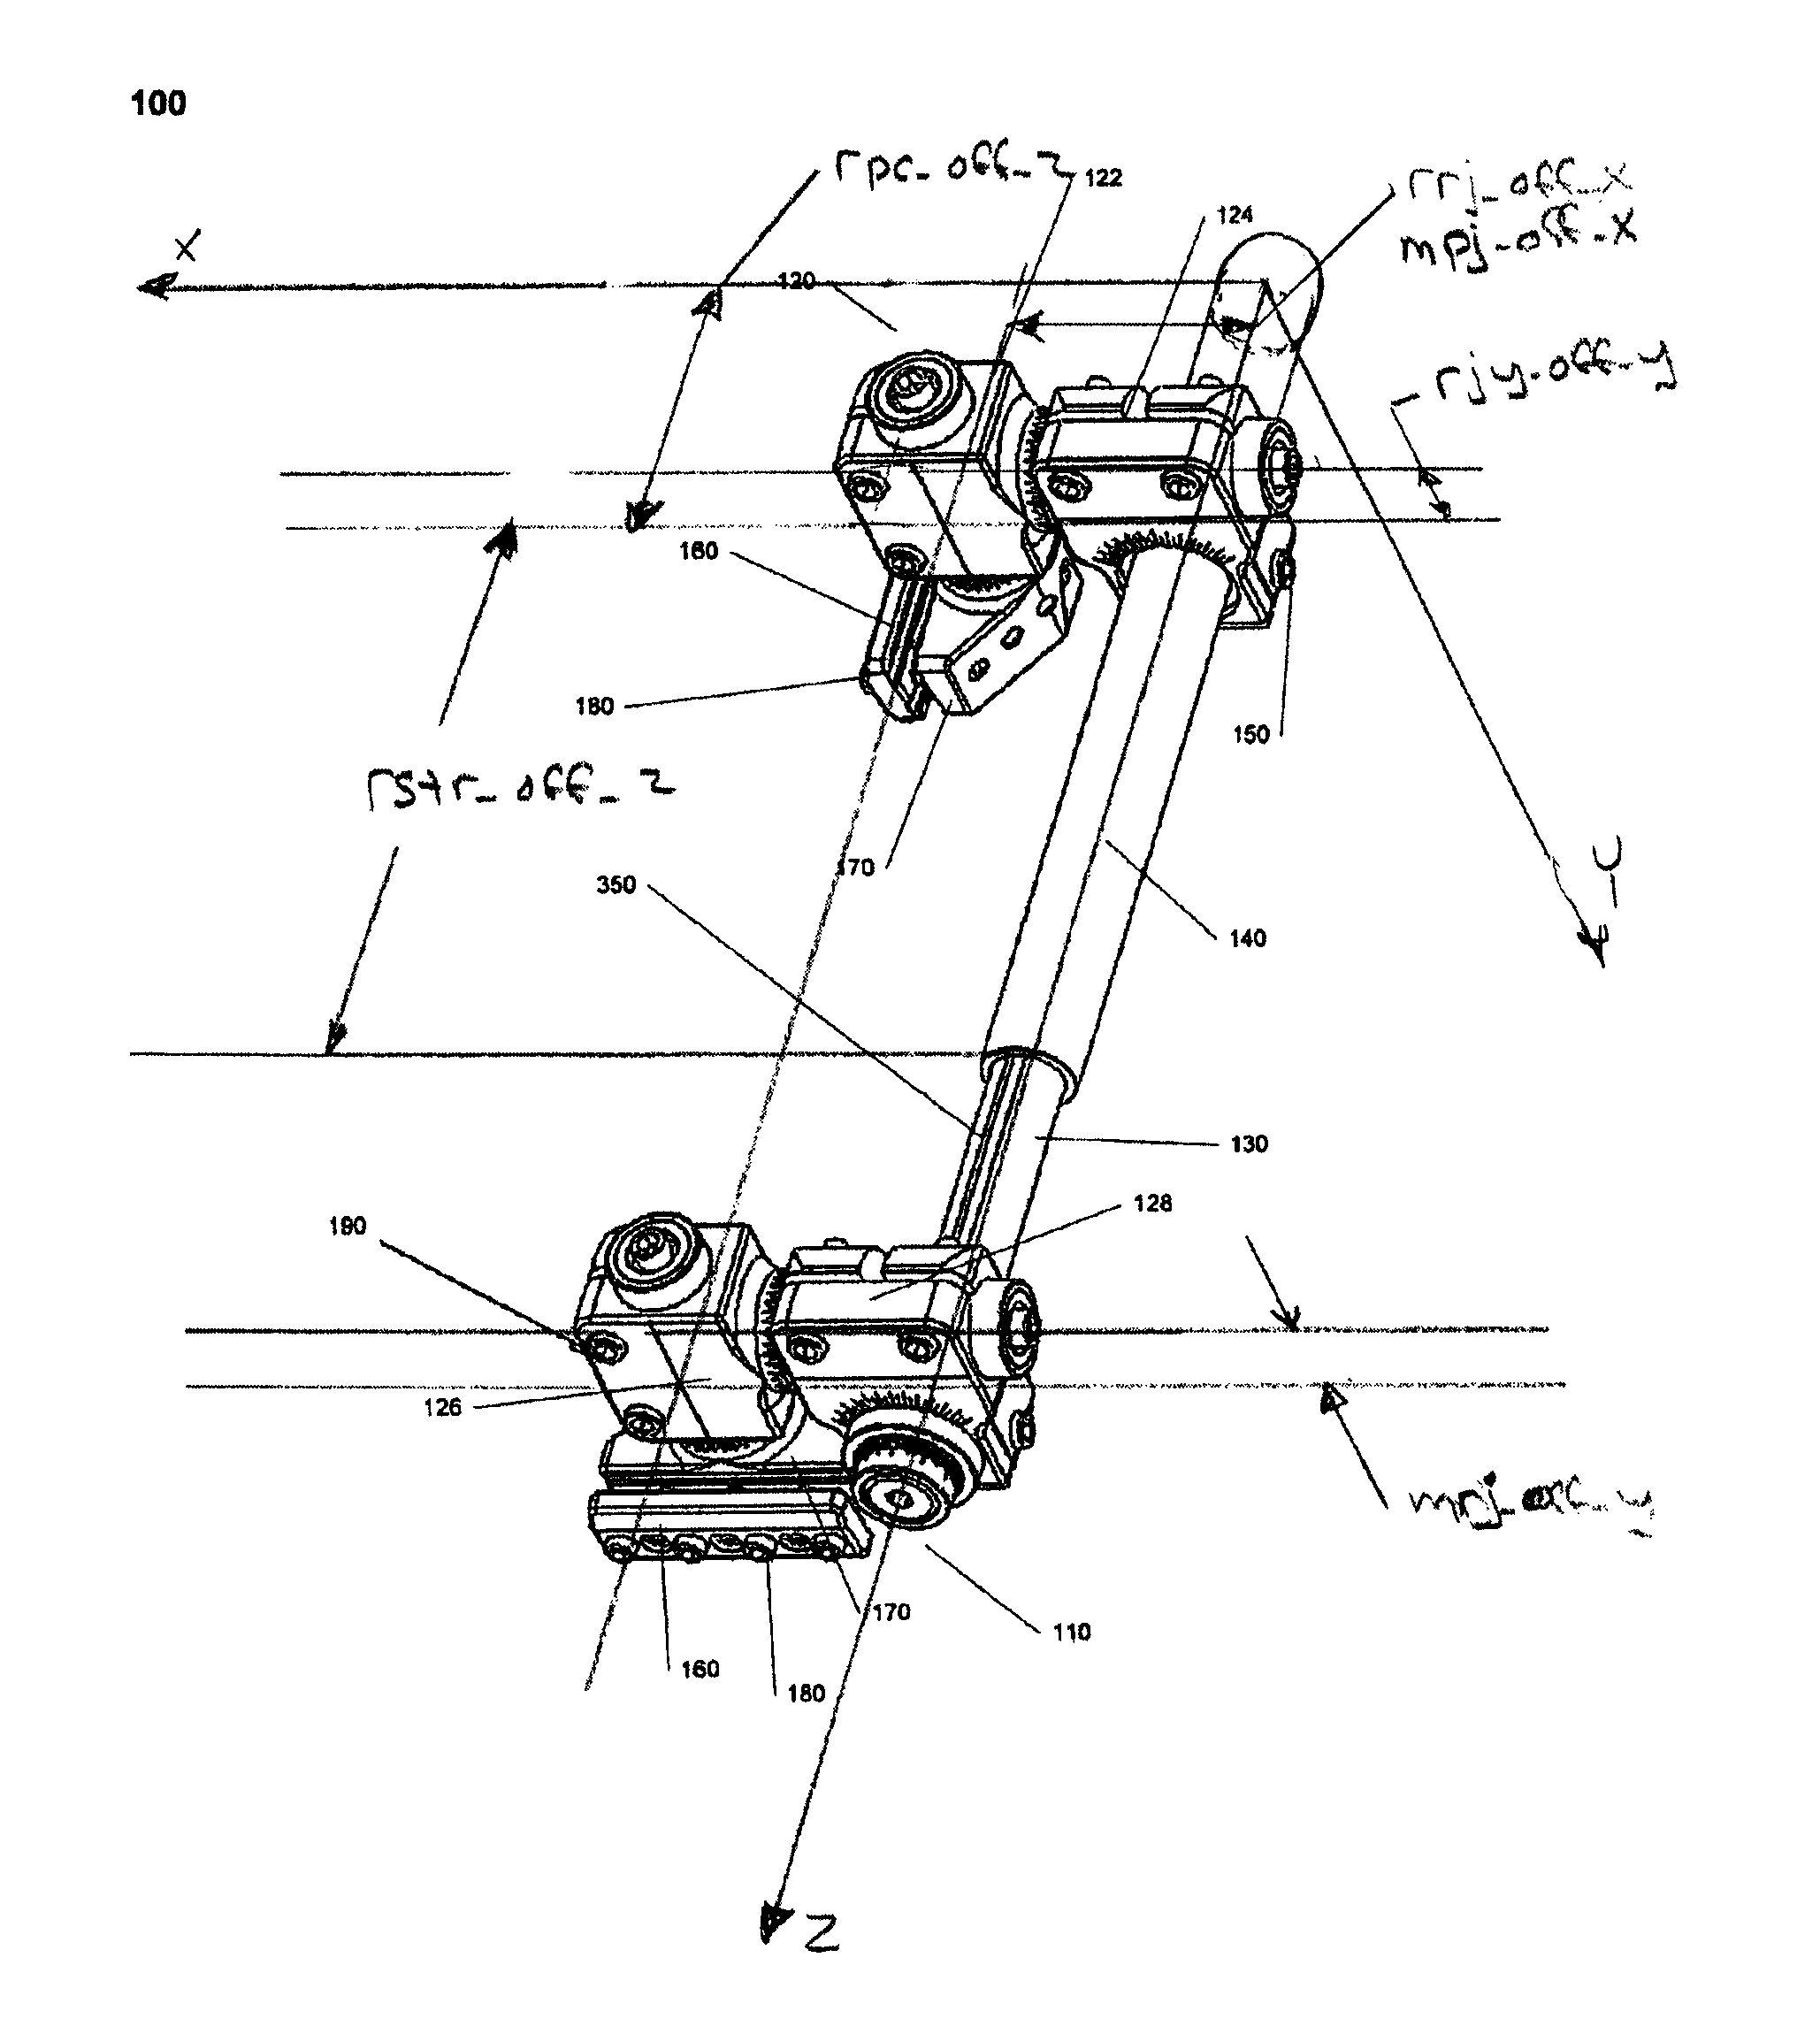 Method for using a fixator device